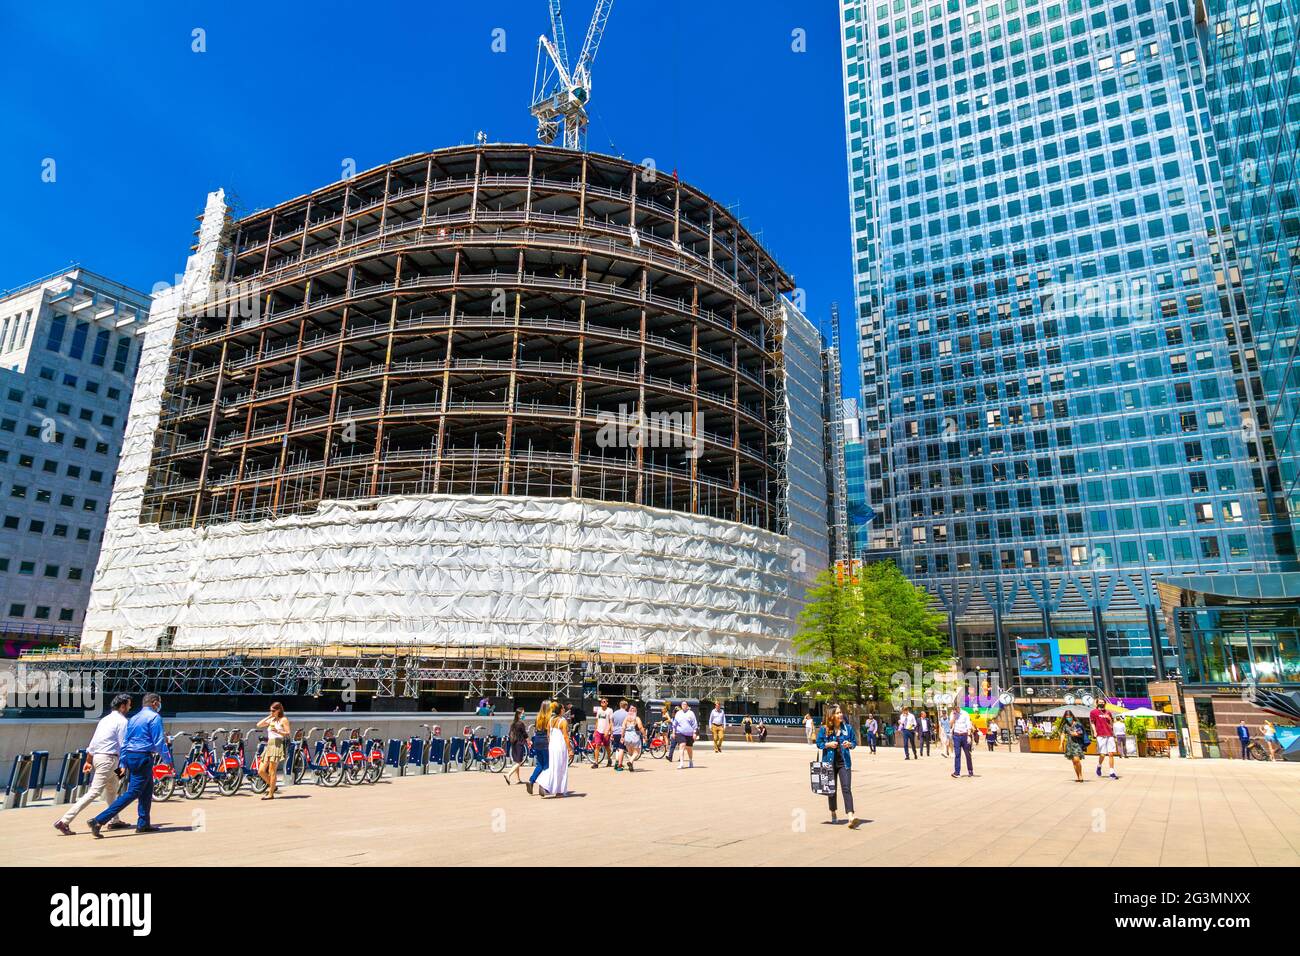 14 June 2021 - Stripping works of Thomson Reuters building underway, as the builind is undergoing a complete renovation and extension, Reuters Plaza, Stock Photo